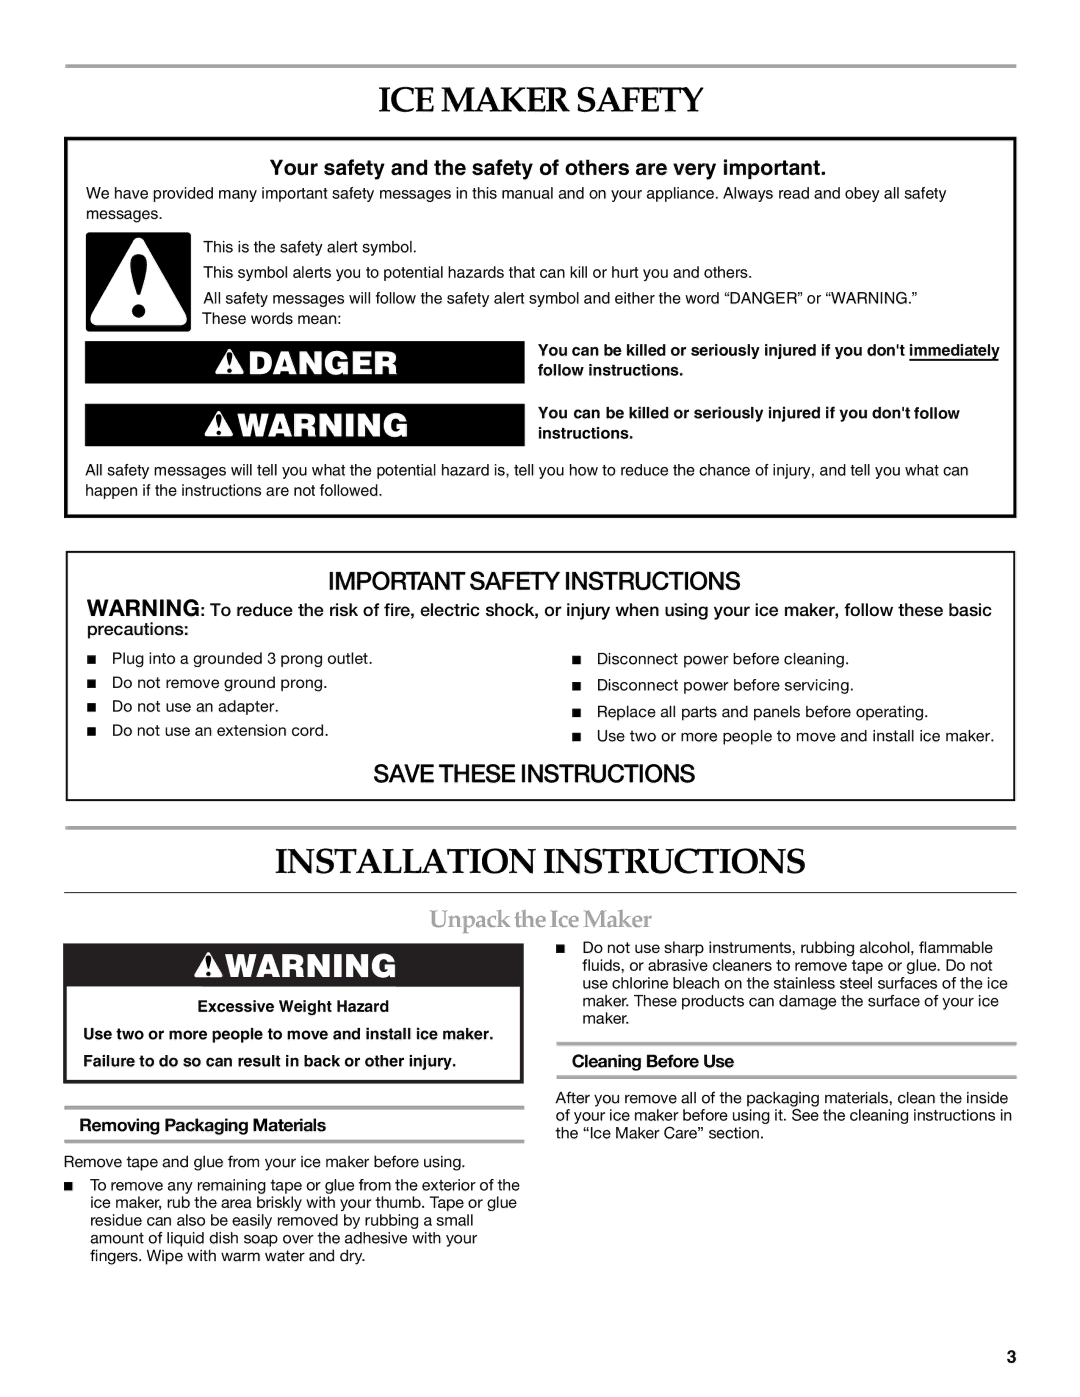 KitchenAid 2313684A manual ICE Maker Safety, Installation Instructions, Unpack the Ice Maker, Removing Packaging Materials 